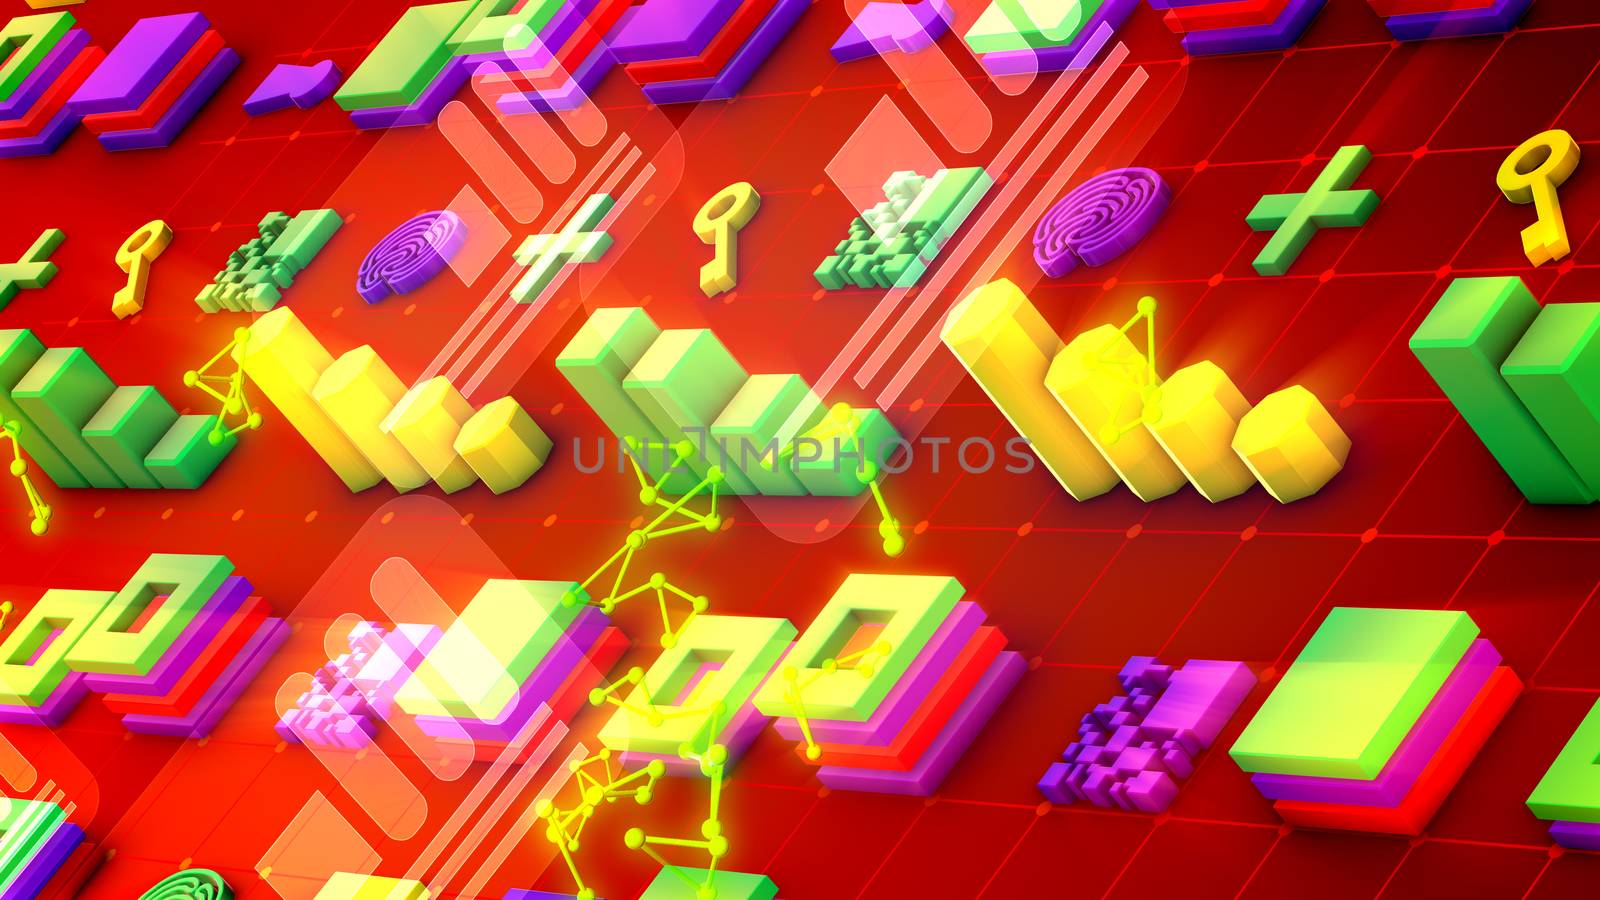 Funny 3d illustration of colorful bar graphs, lines of squares, lengthy keys, large pluses, square mazes, and bright golden triangulars in the red background. It looks cheerful